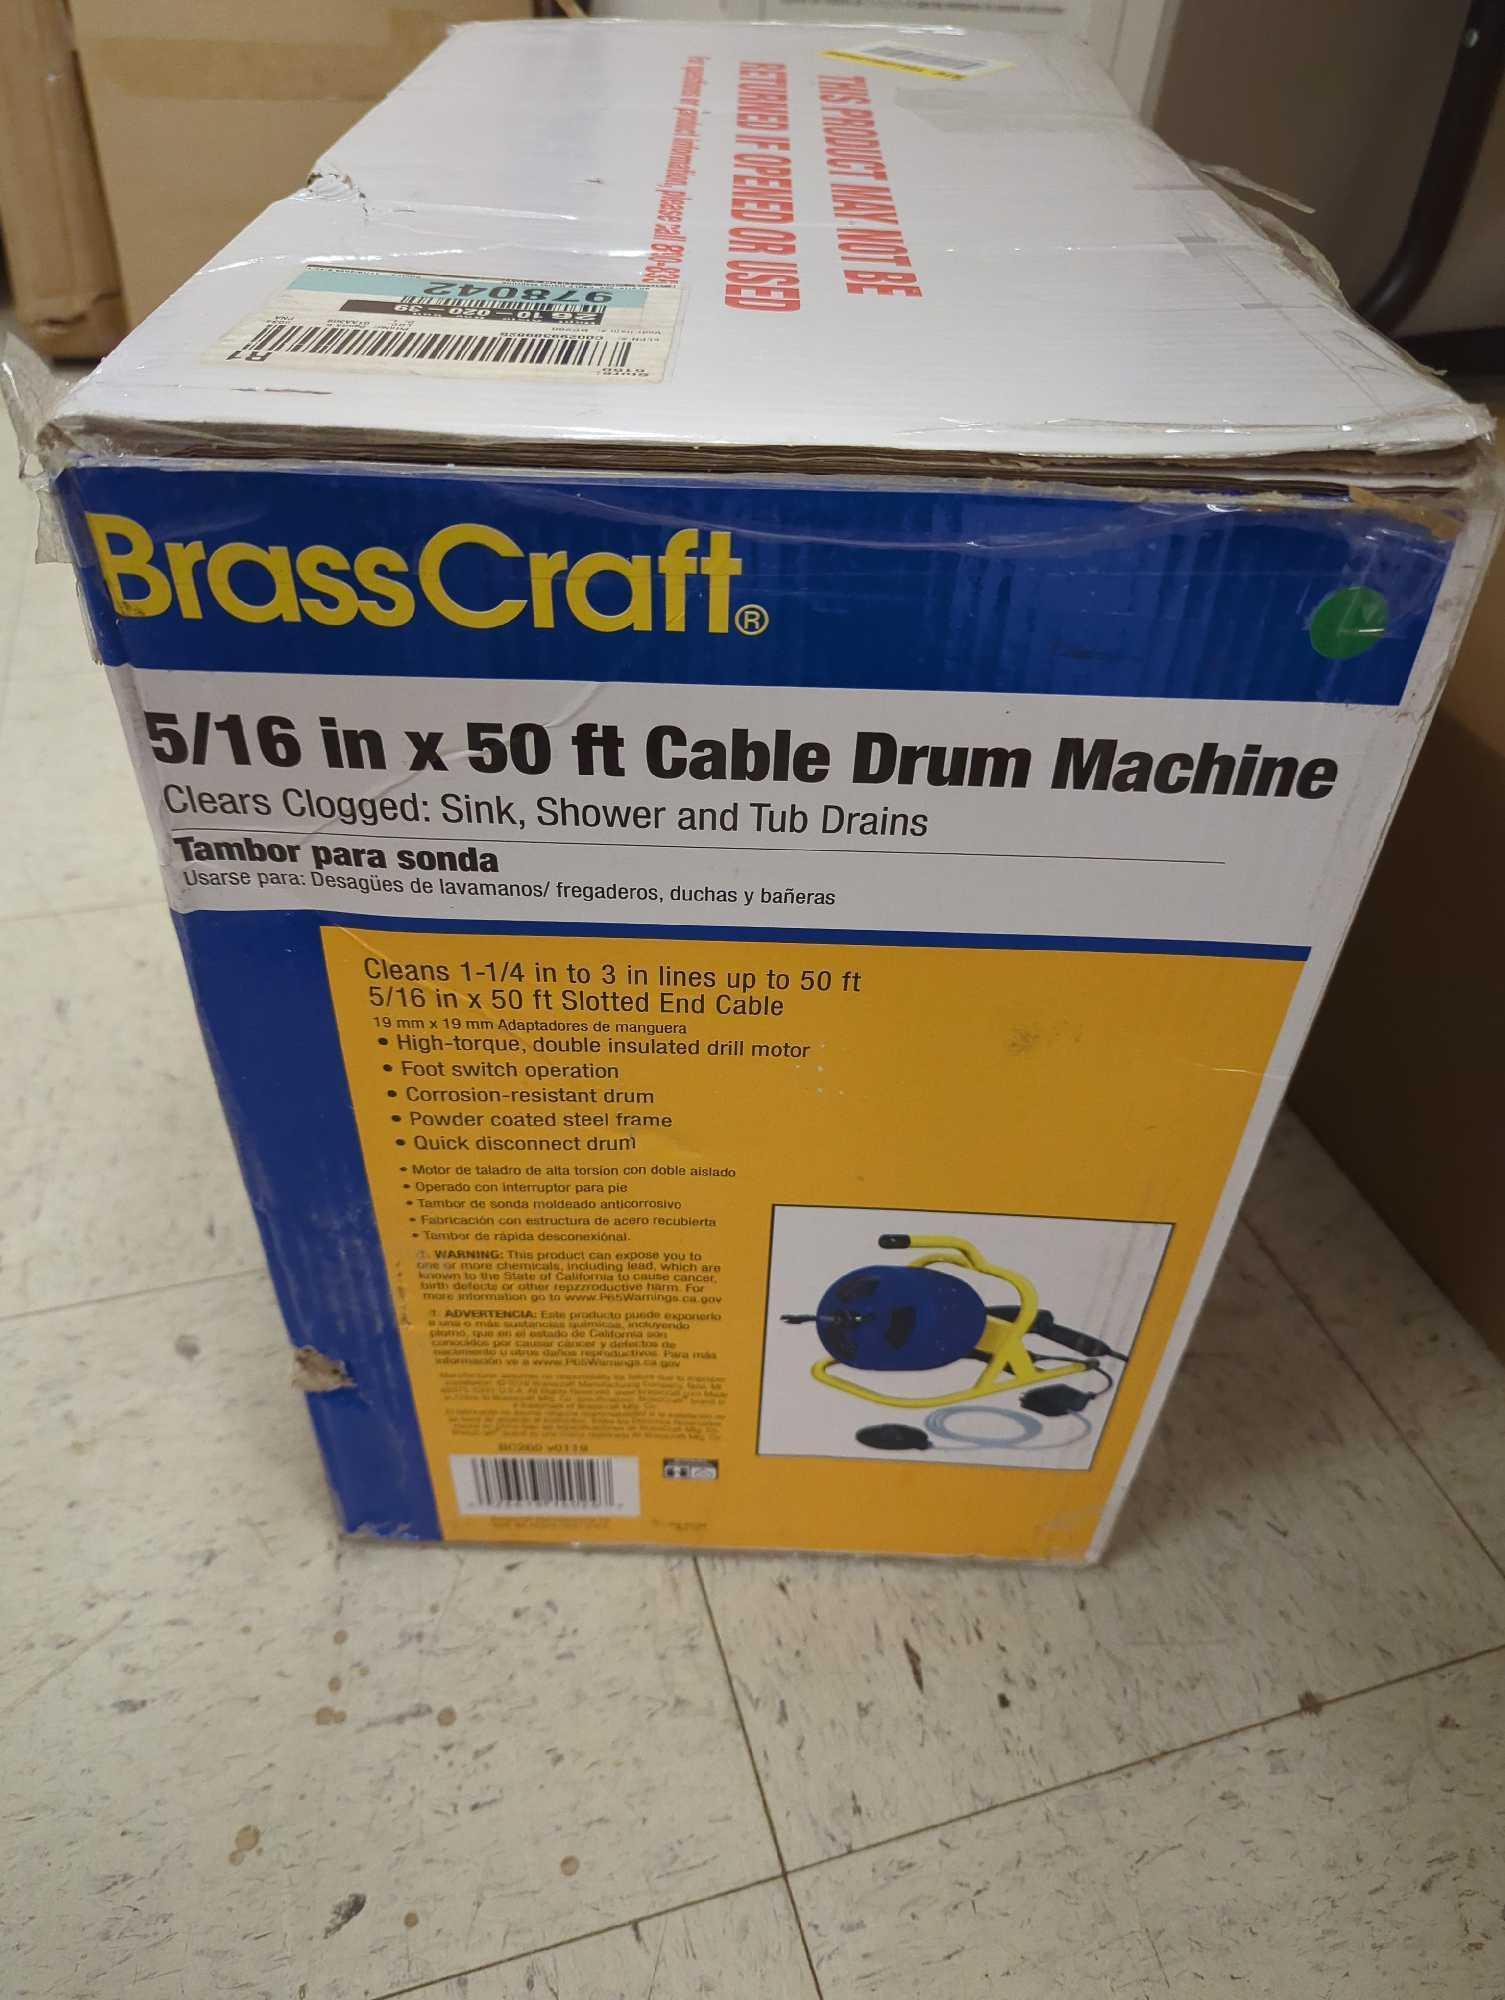 Cobra 5/16 in. x 50 ft. Cable Drum Machine, Appears to be New in Factory Sealed Box Retail Price